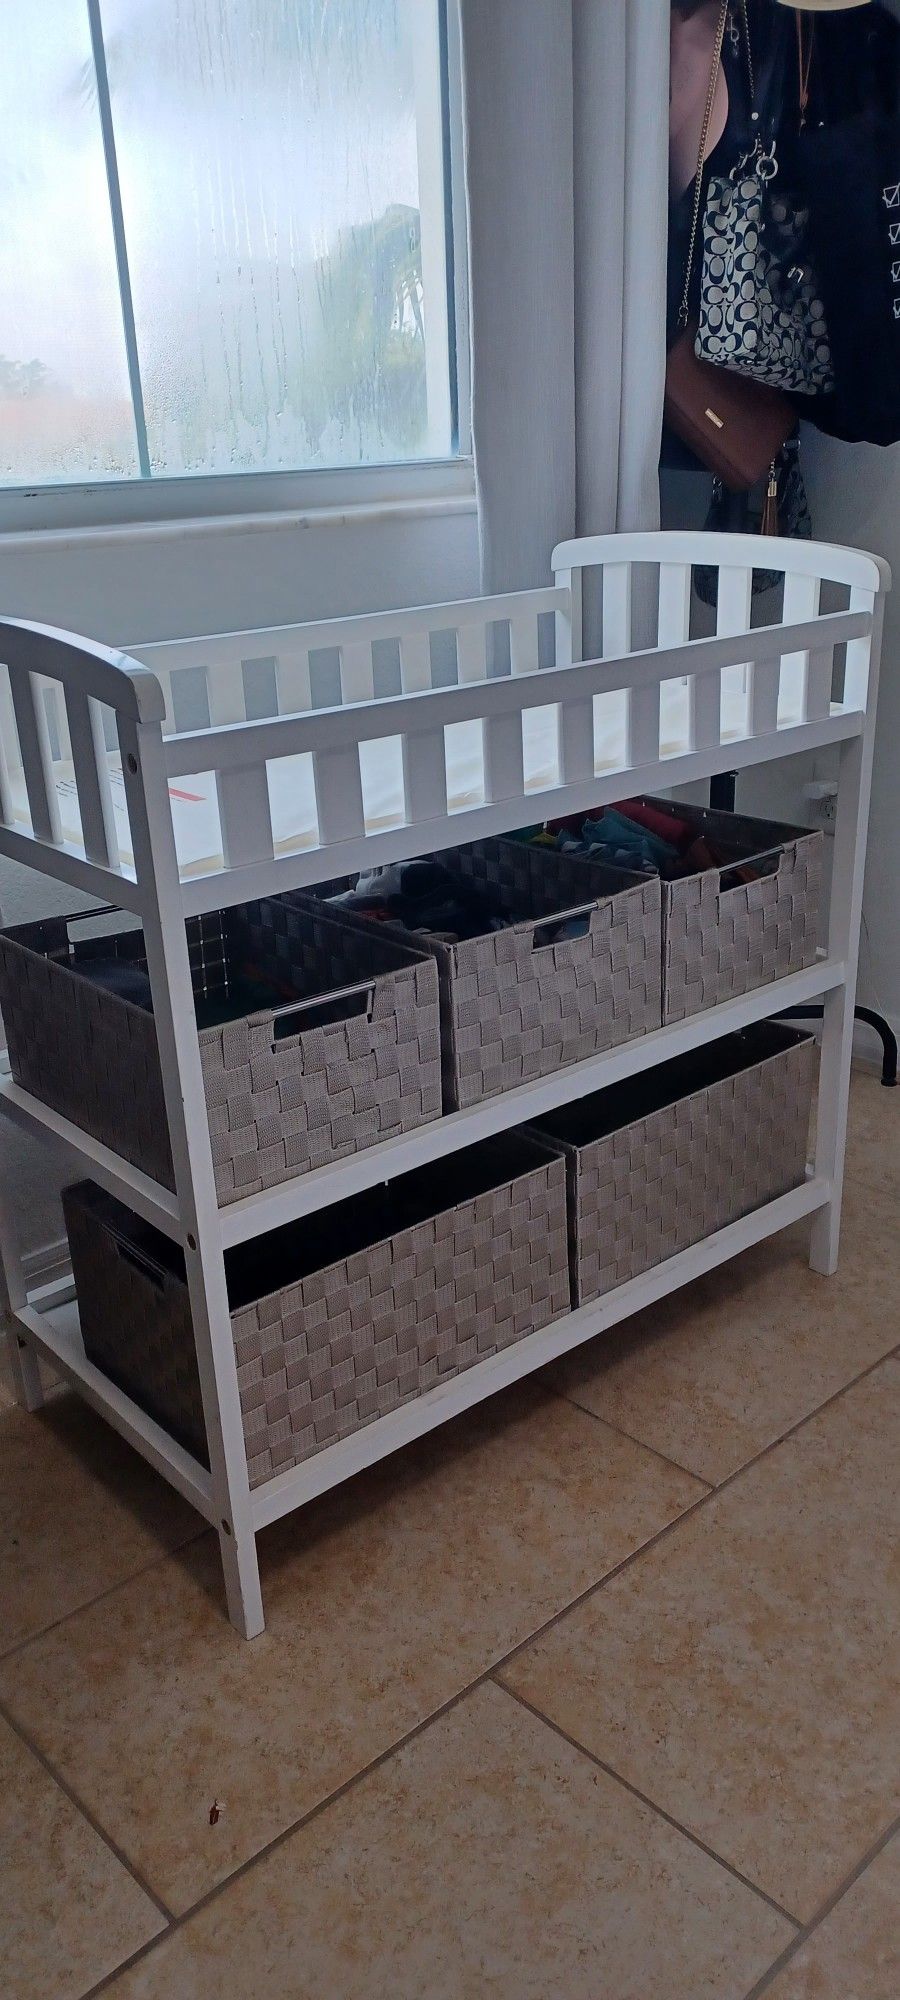 Changing Table With Baskets And Mattpad 